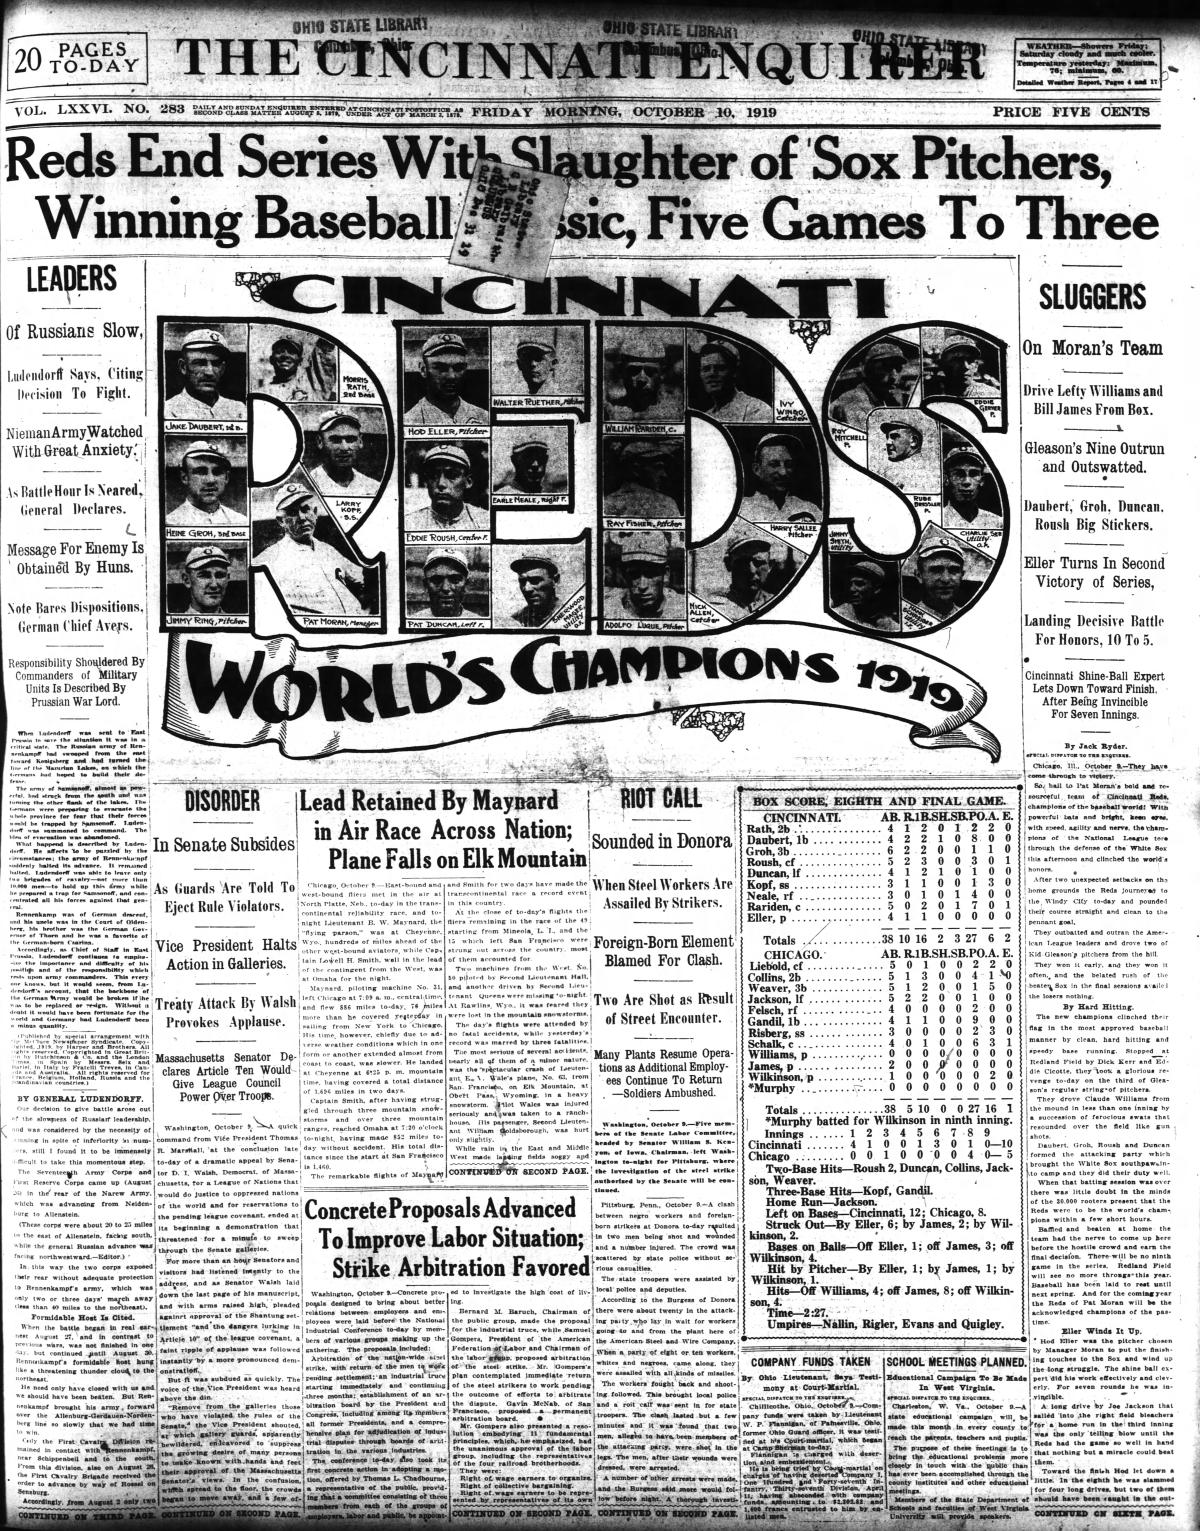 Cincinnati Reds - October 9, 1919: The Reds take down the